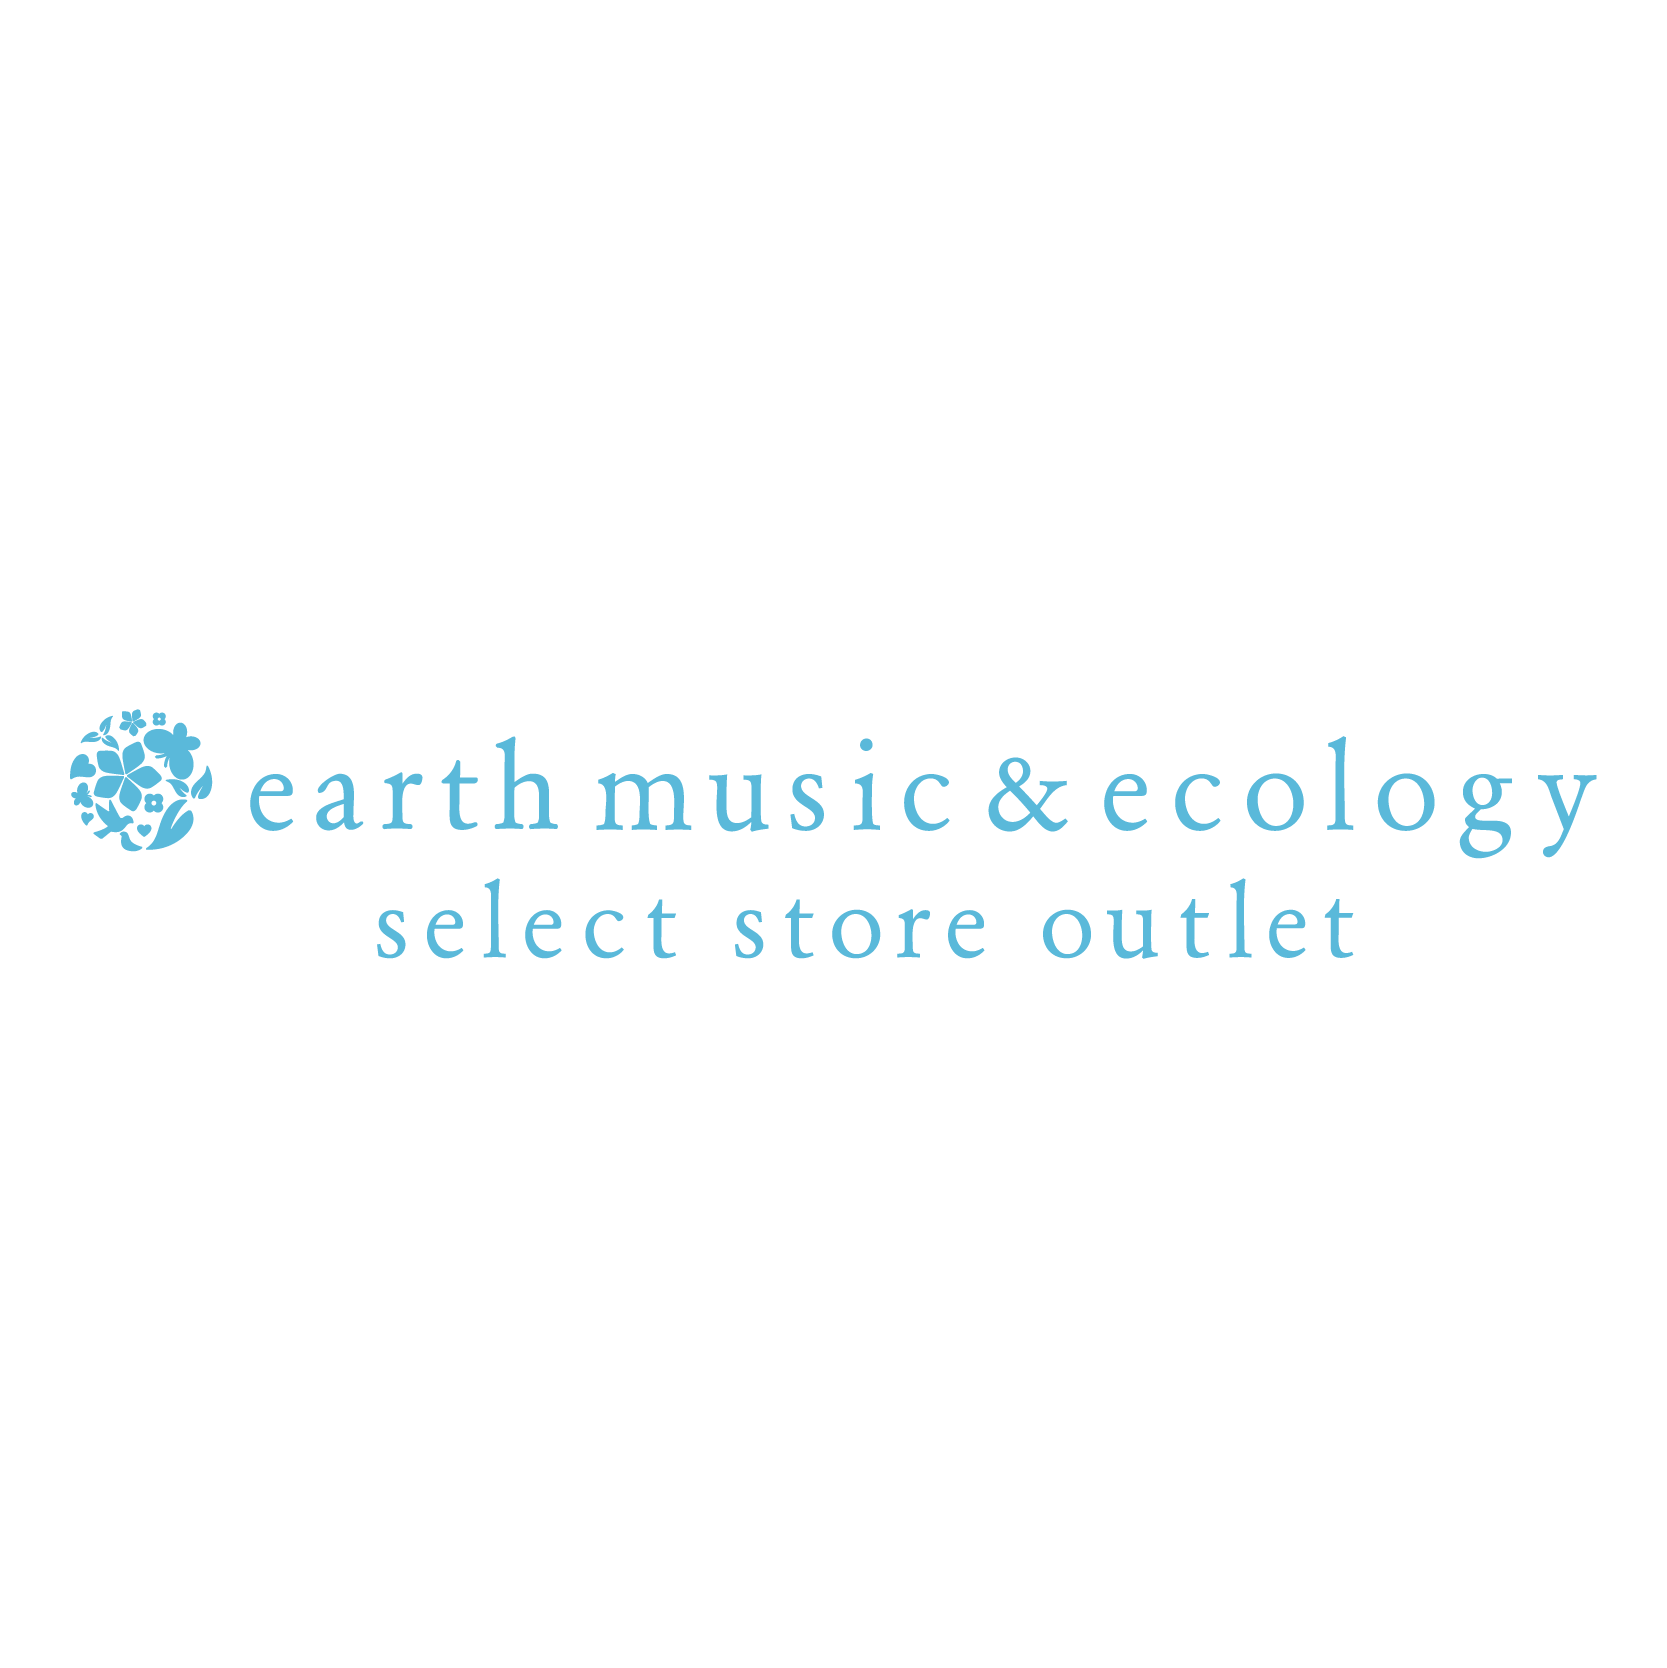 earth music&ecology select store outlet